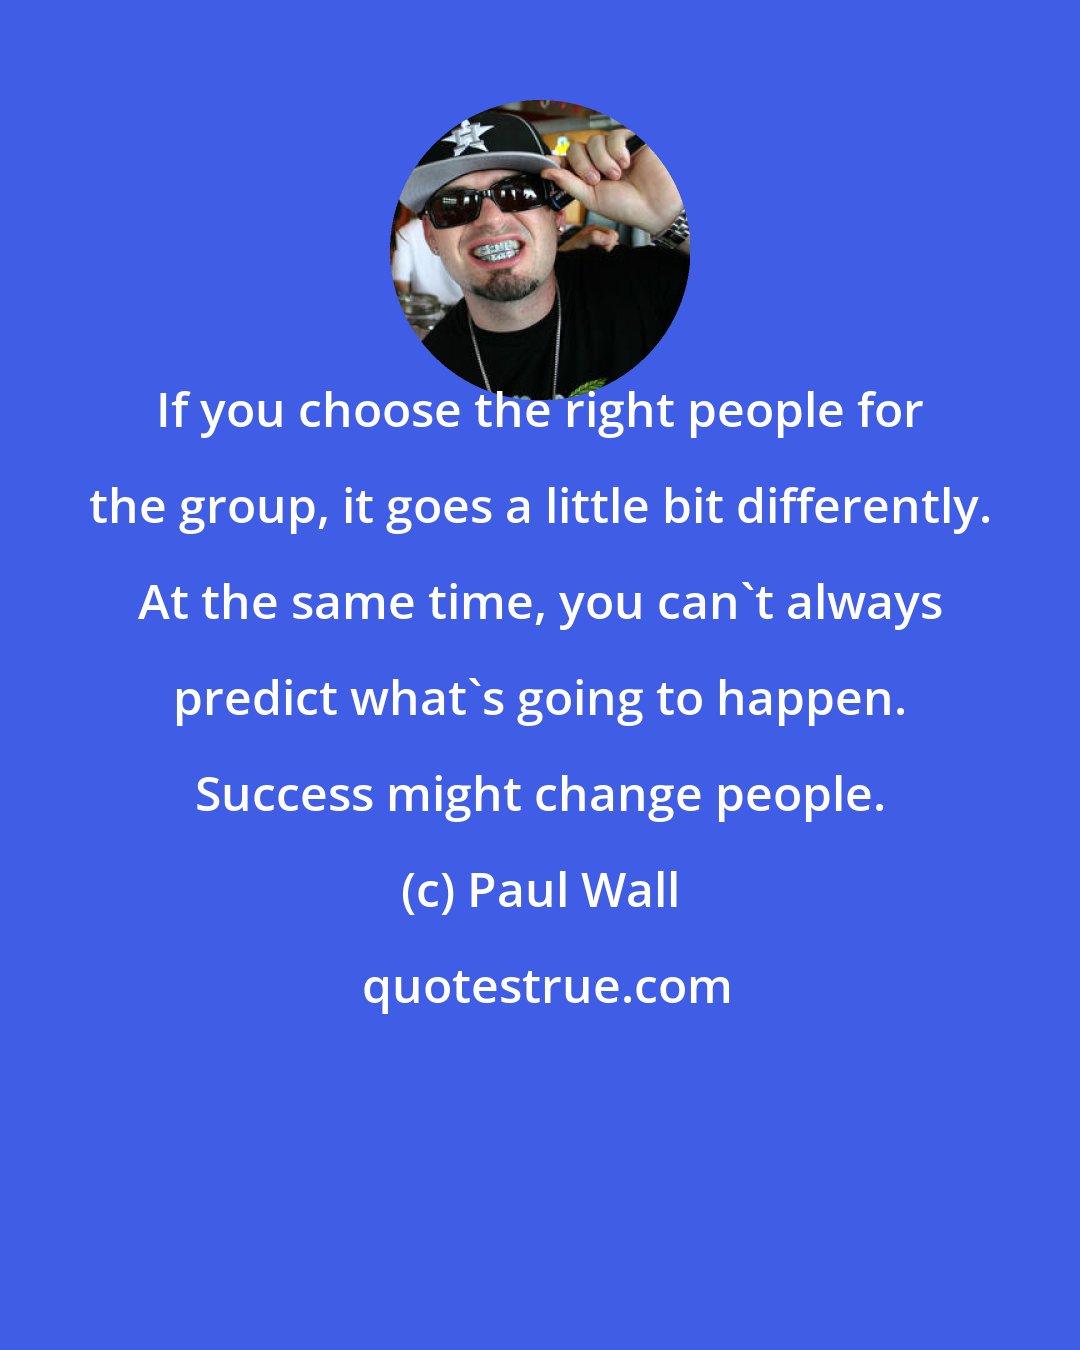 Paul Wall: If you choose the right people for the group, it goes a little bit differently. At the same time, you can't always predict what's going to happen. Success might change people.